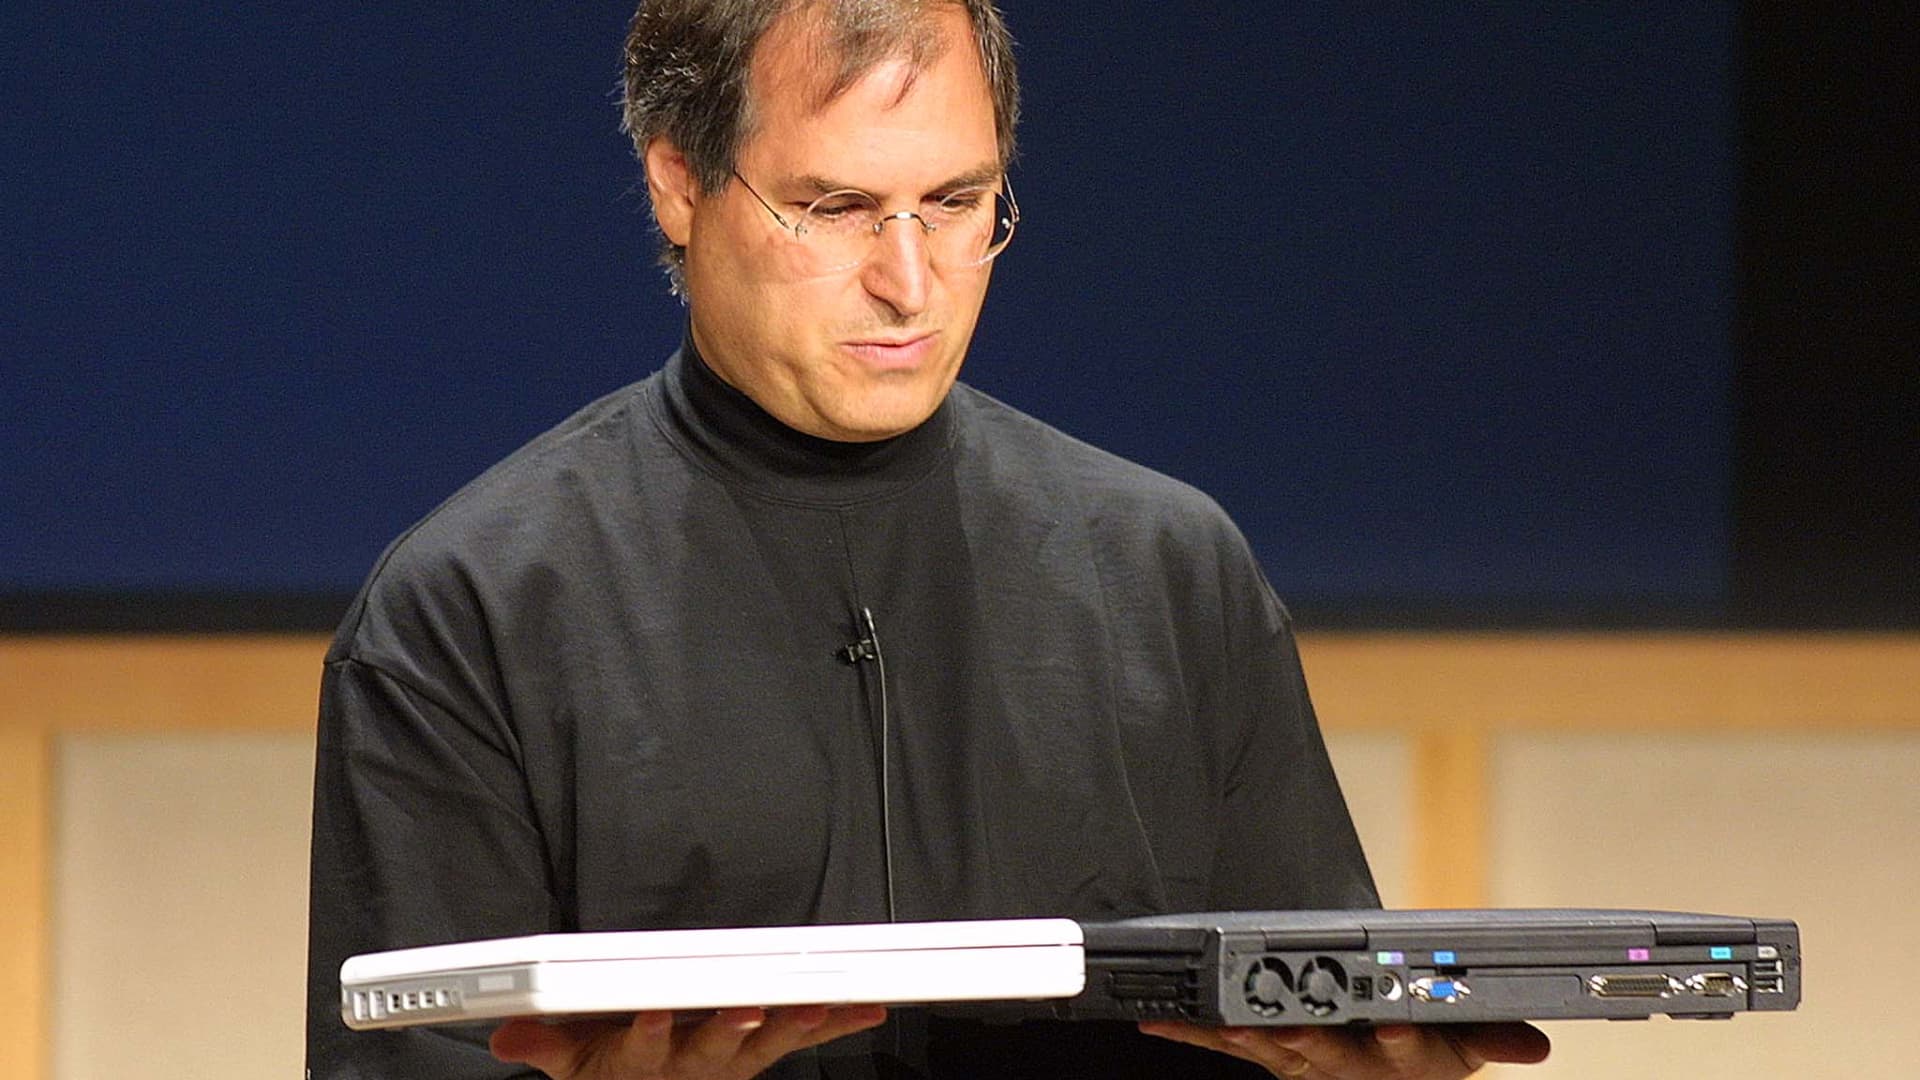 Steve Jobs compares the weight of the iBook notebook computer weighing4.9 pounds (L) and a Dell computer notebook during a Apple Media event in Cupertino, California 01 May 2001.